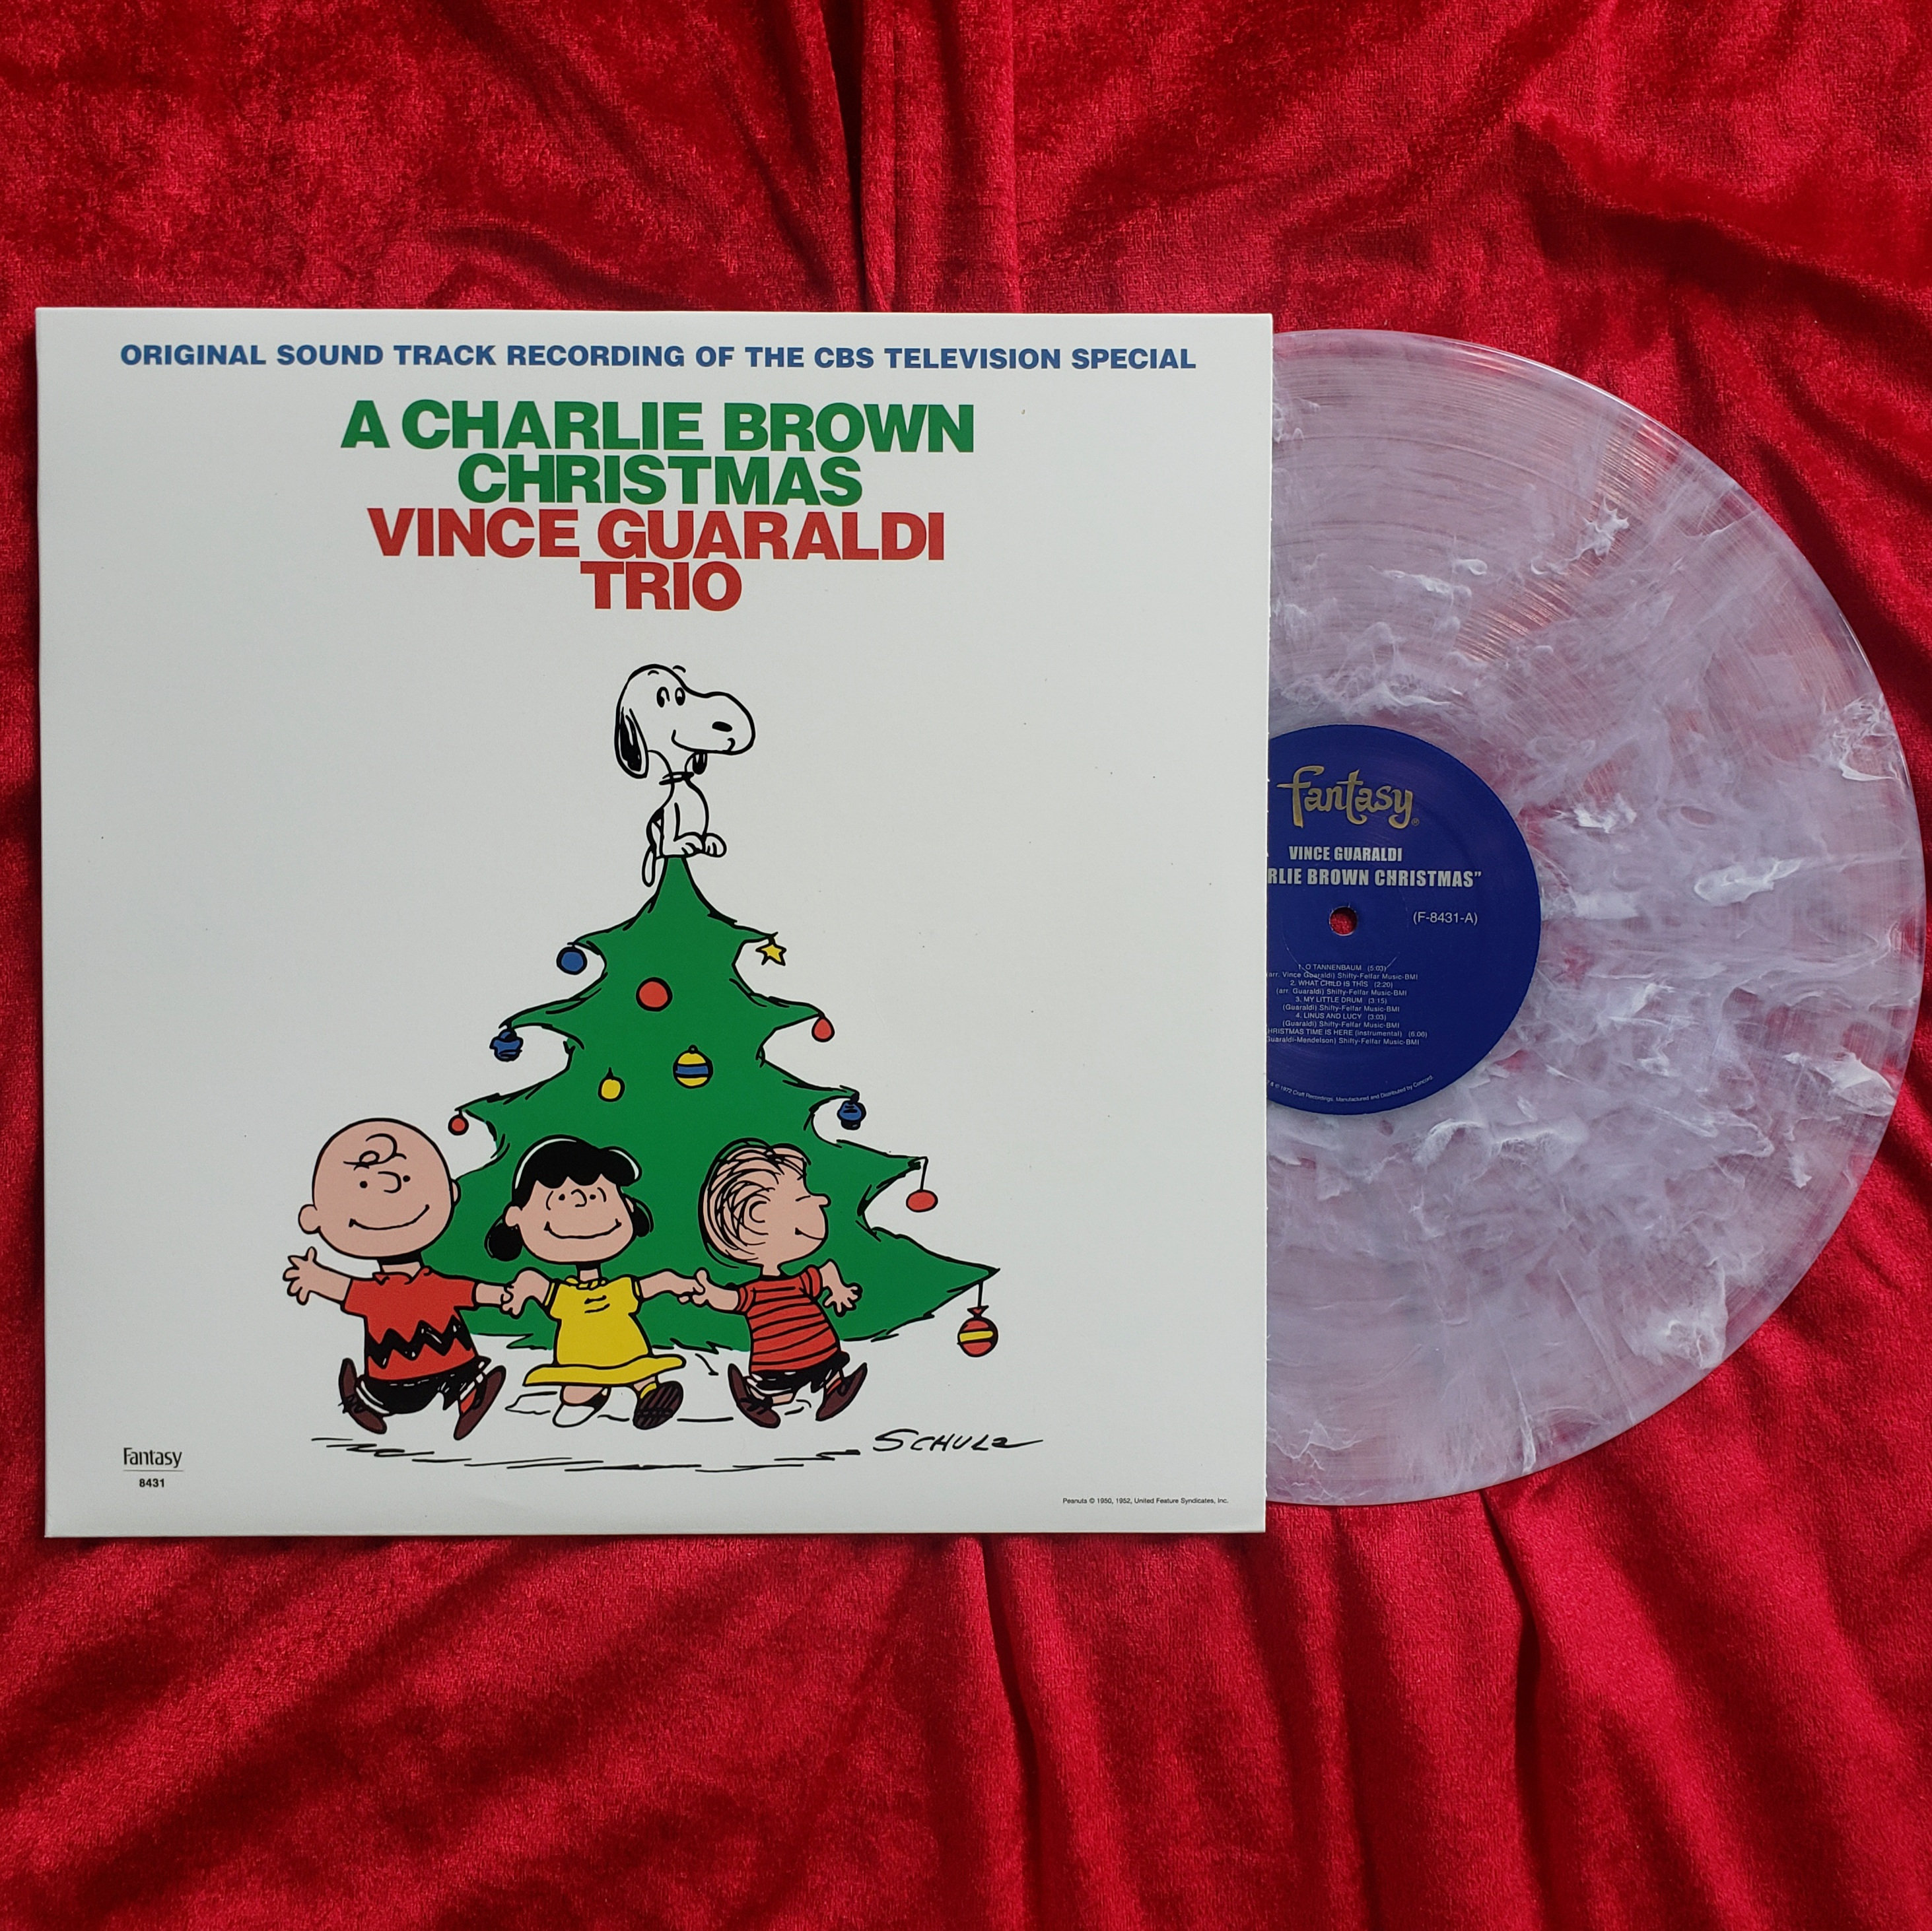 What Child Is This (Greensleeves) by Vince Guaraldi